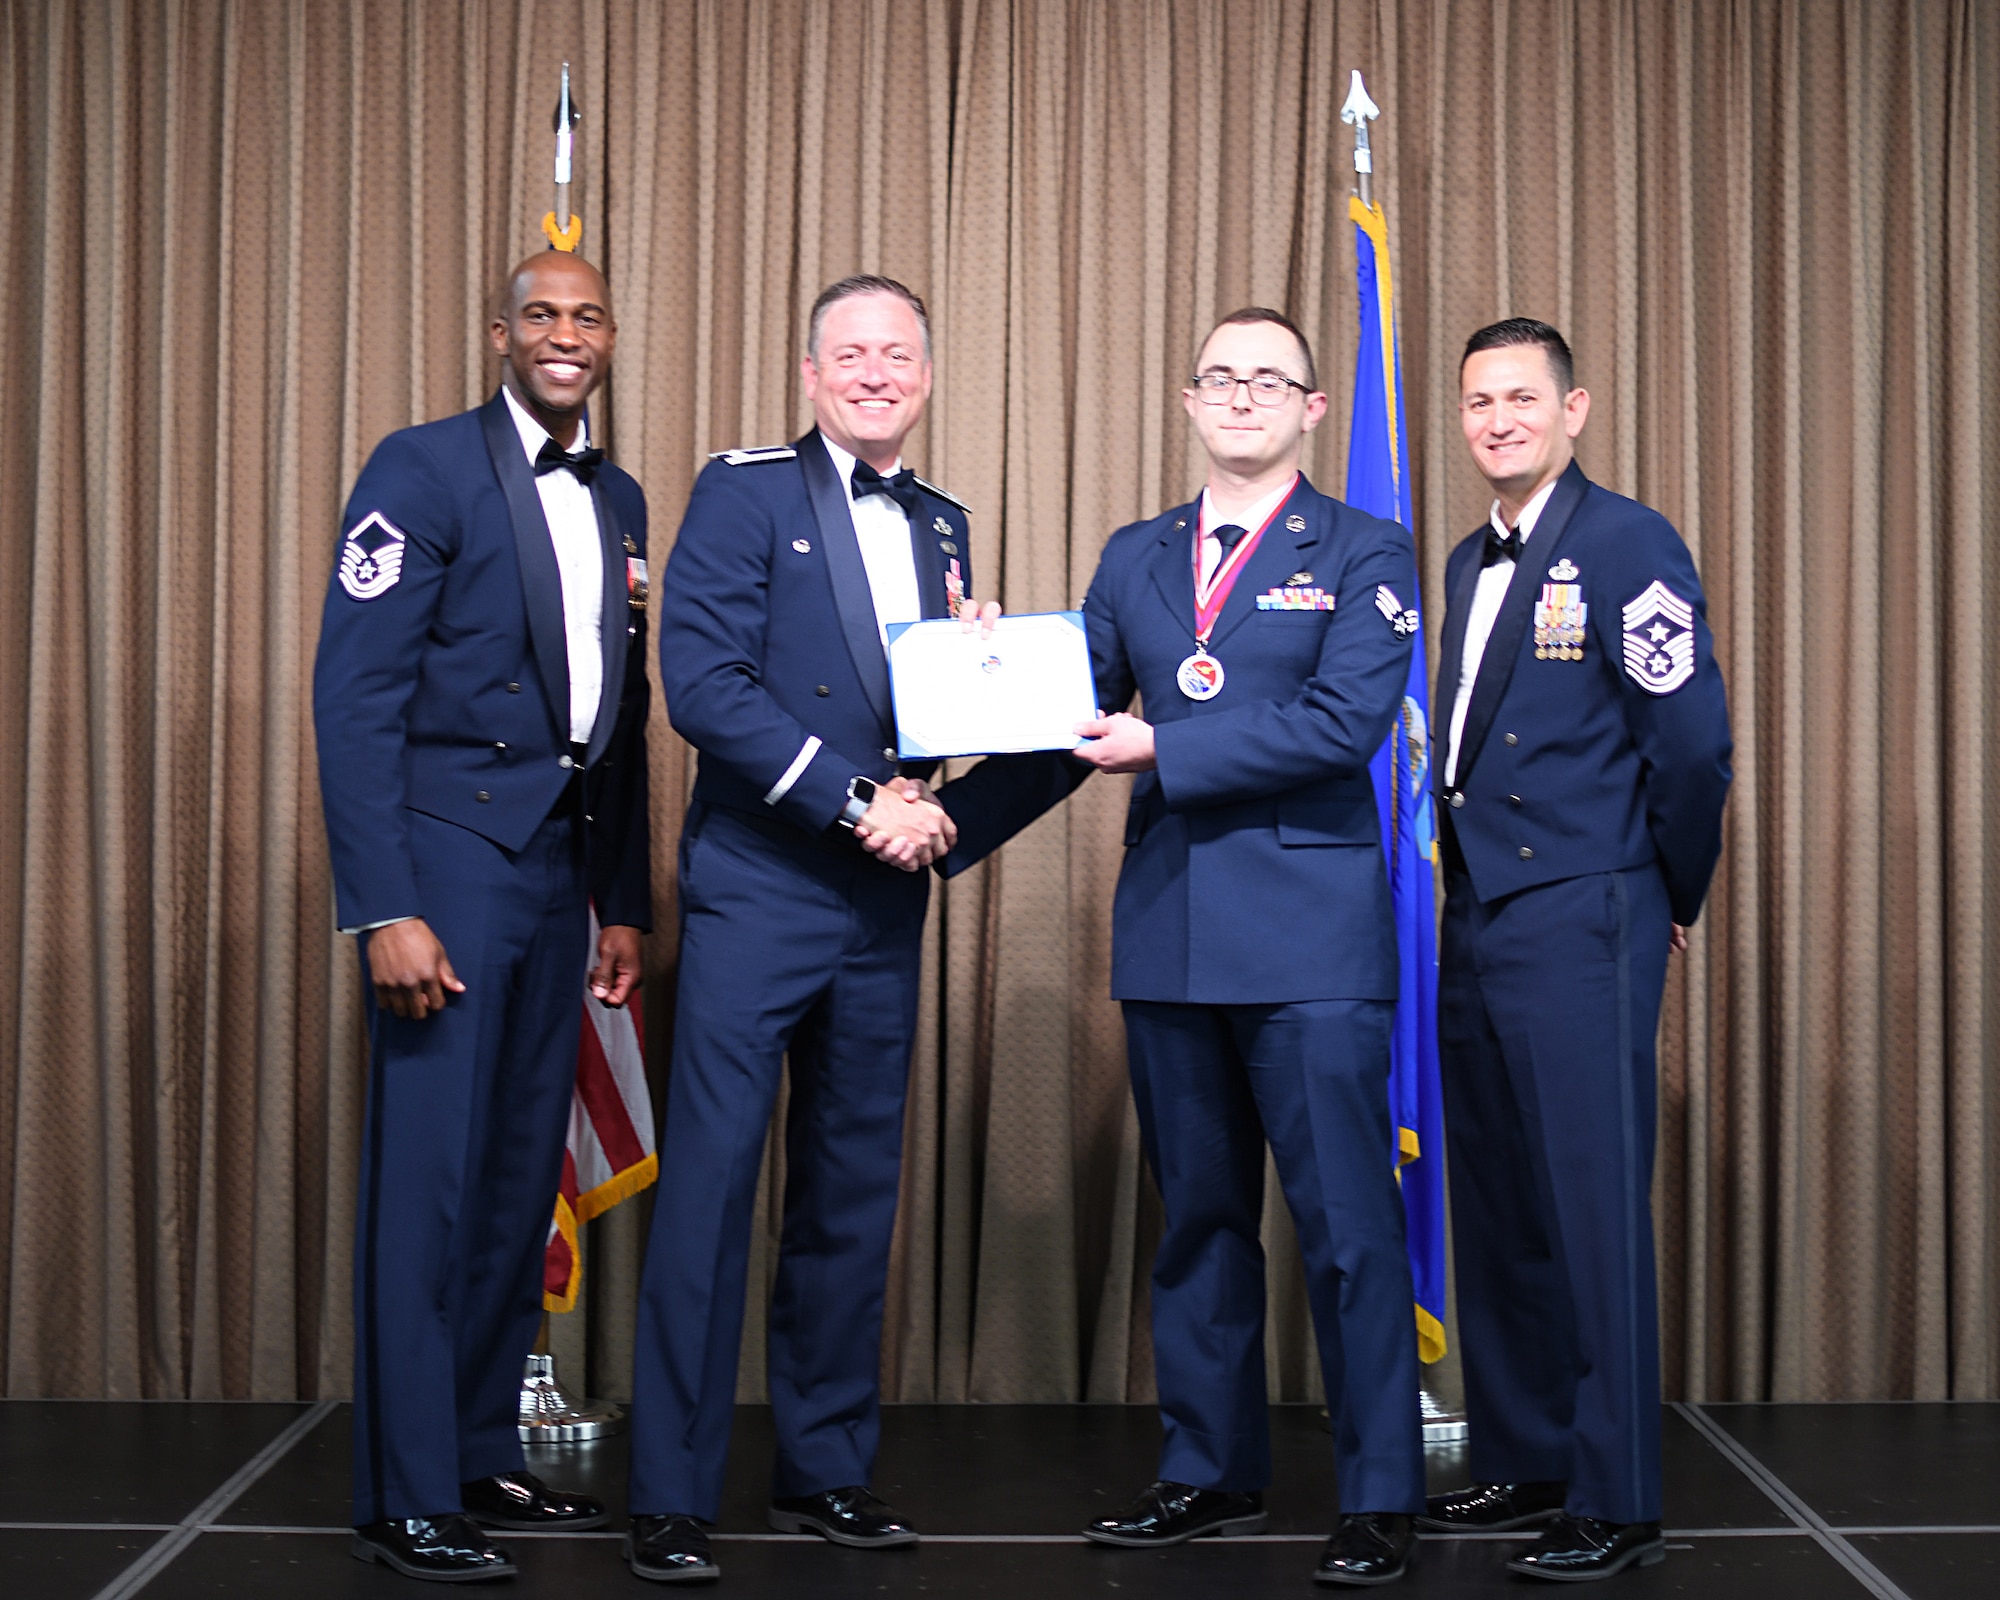 Col. Benjamin Spencer, 319th Air Base Wing commander, presents diploma to SrA Tyler Loper, Etchberger Airman Leadership School graduate, June 20, 2019, on Grand Forks Air Force Base, North Dakota. ALS graduation is the culmination of the first level of the Enlisted Professional Military Education continuum directed toward preparing upcoming noncommissioned officers with leadership skills for their careers. (U.S. Air Force photo by Senior Airman Elijaih Tiggs)